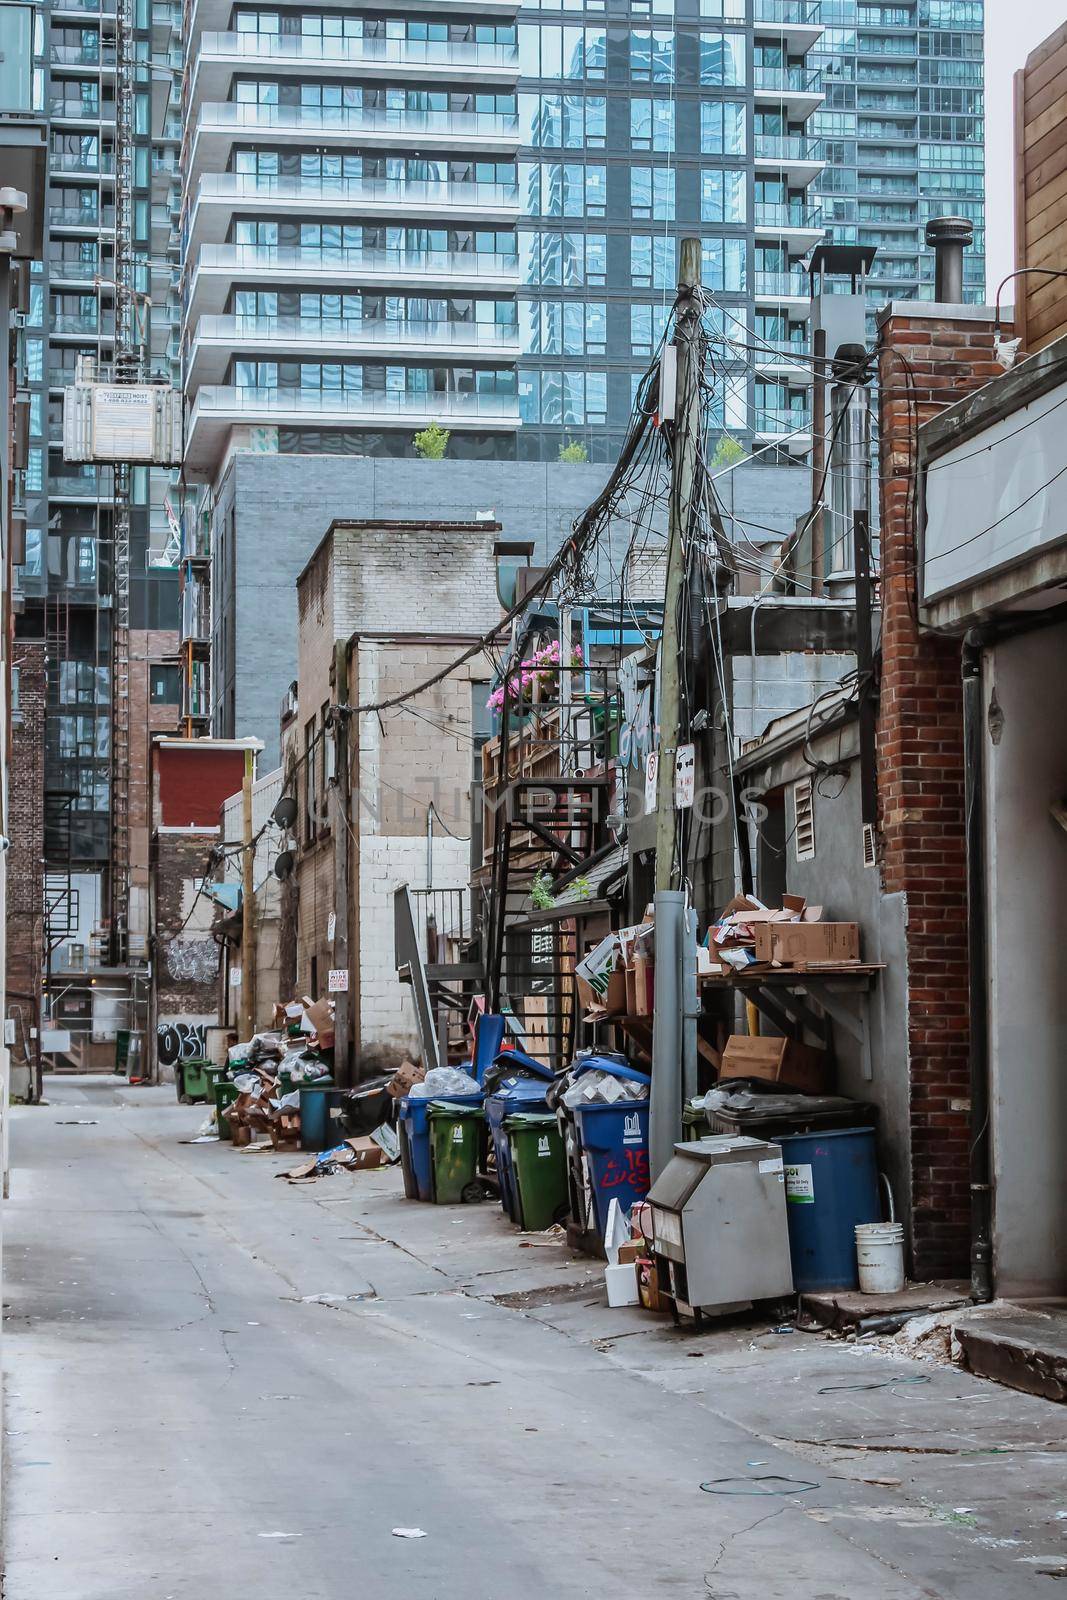 Large garbage pile inside black bags and green containers on street. Toronto, Ontario, Canada - August 29, 2019: by JuliaDorian